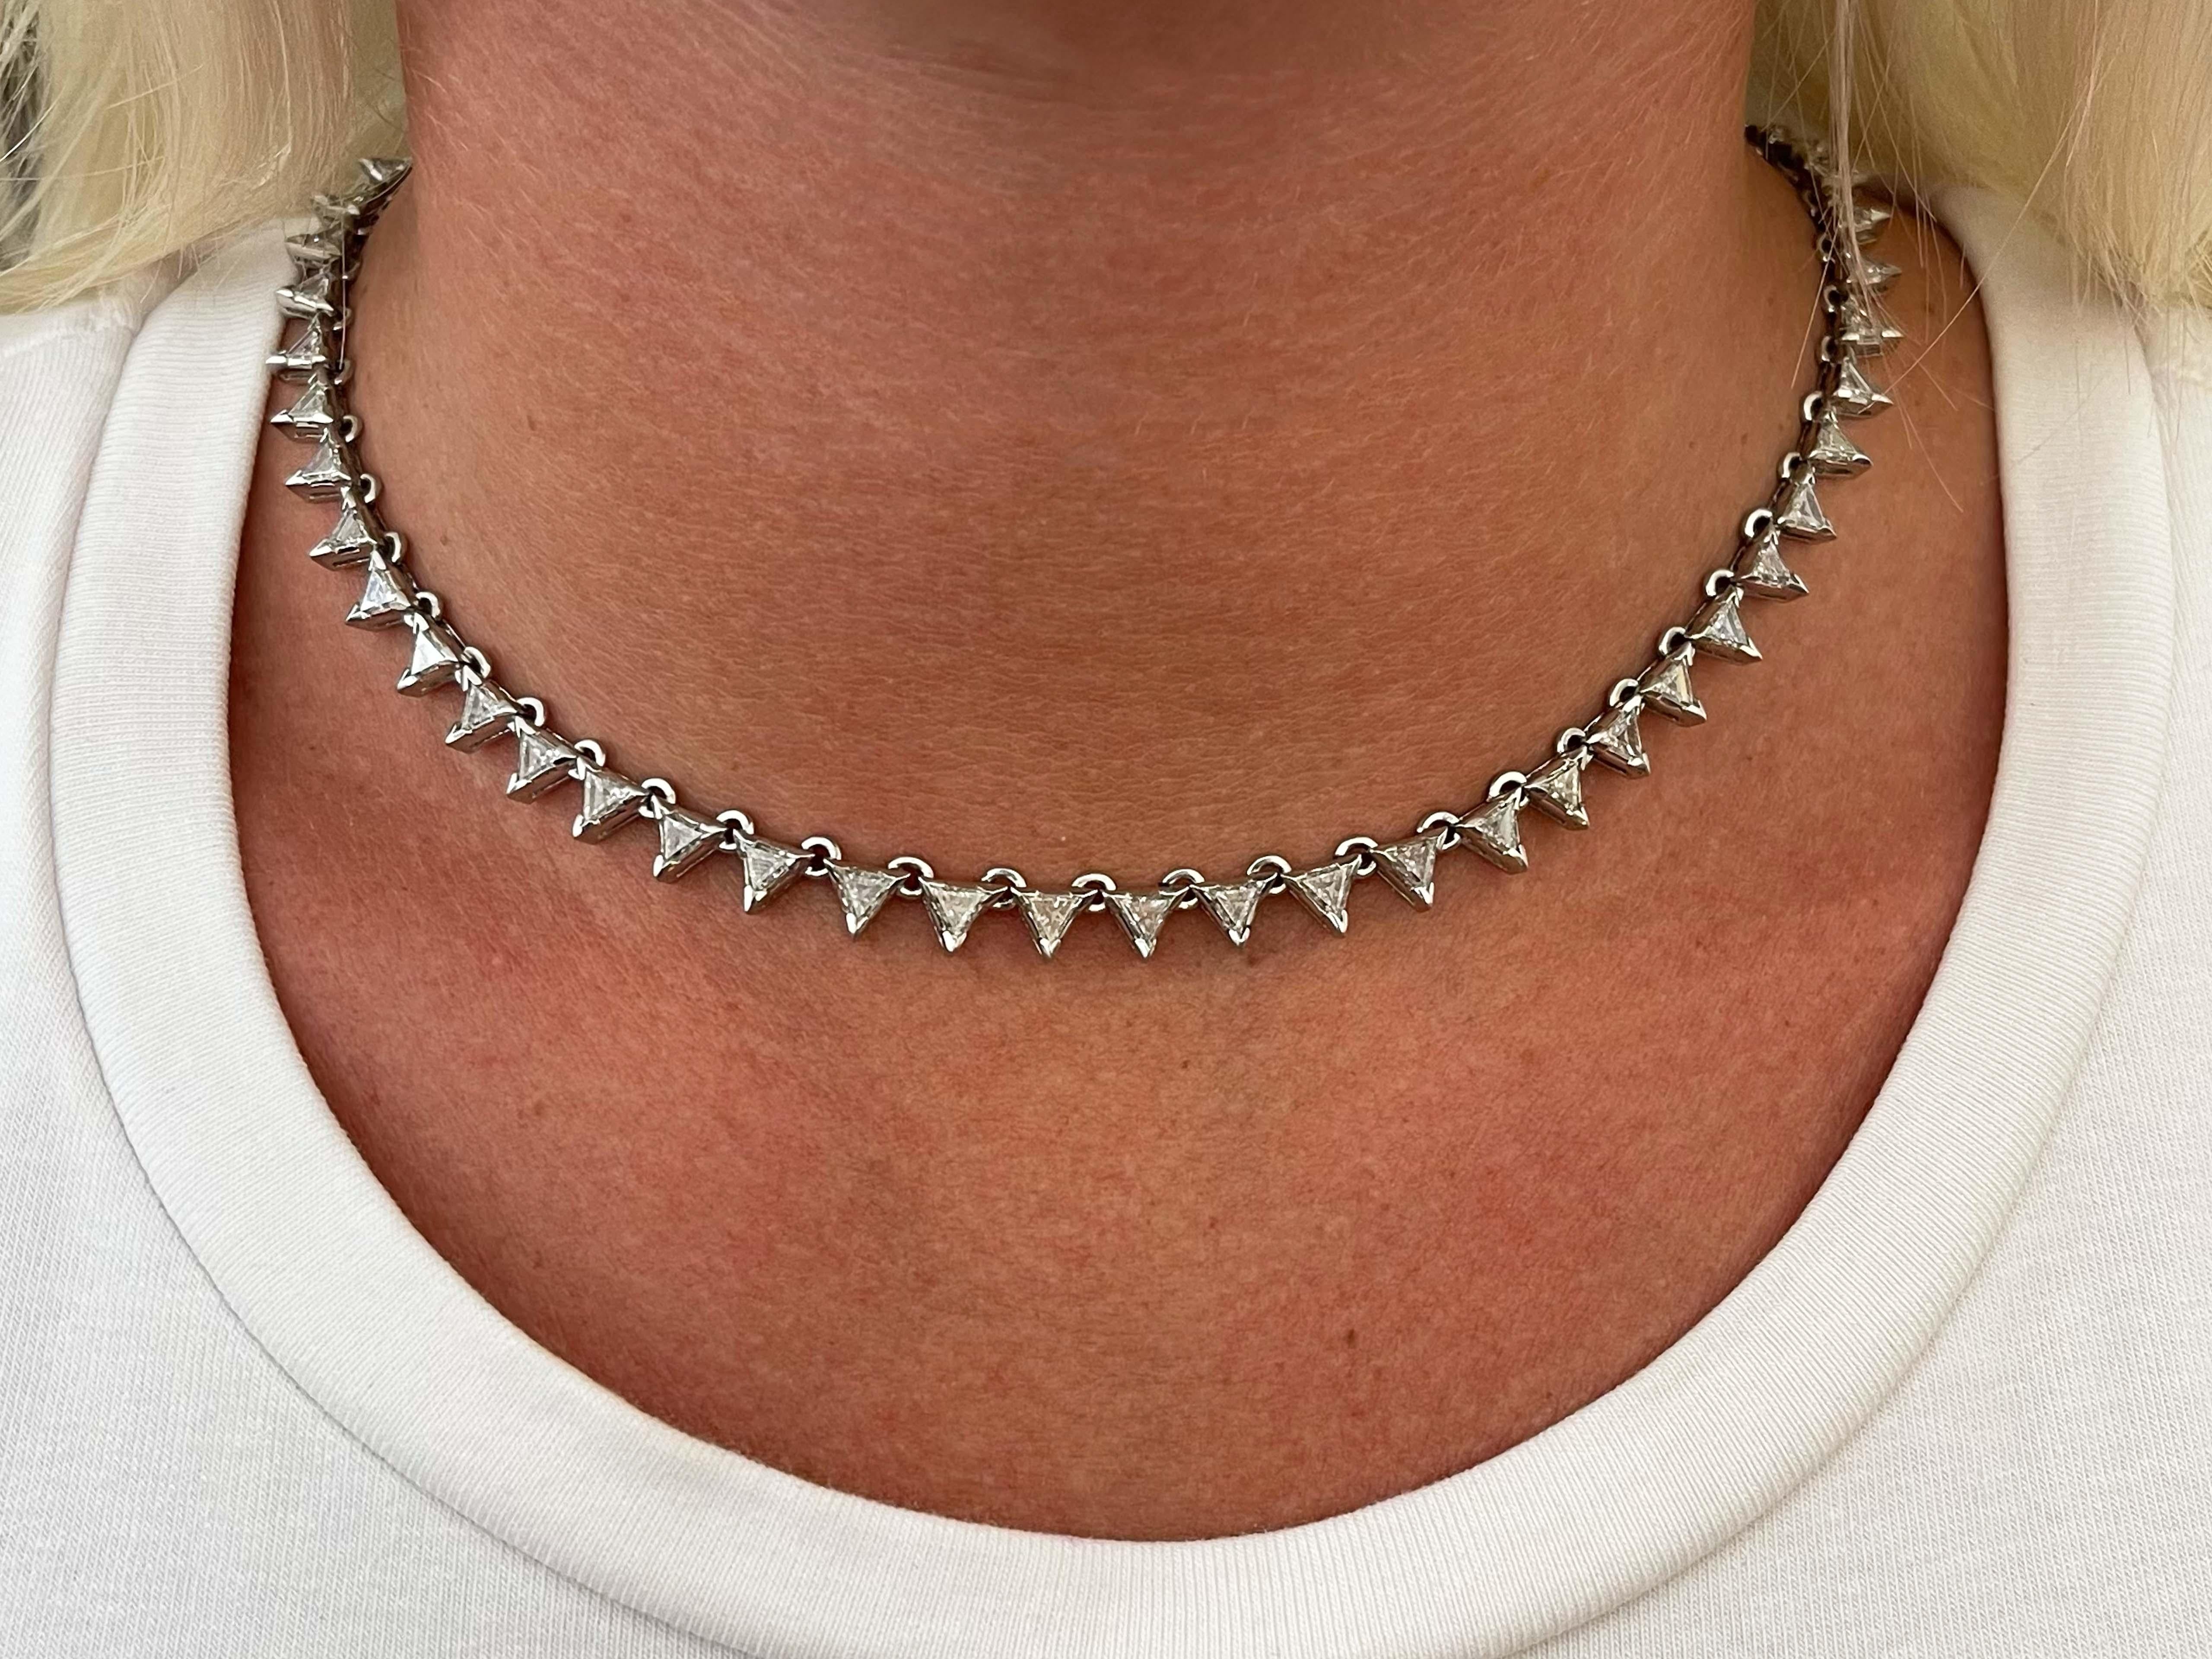 Item Specifications:

Style: Diamond Choker Necklace

Metal: Platinum

Total Weight: 40.1 Grams

Chain Length: 16 inch

Diamonds: 58 Trillion Diamonds

Total Diamond Weight: 9.72 Carats

Diamond Color: G-H

Diamond Clarity: VS1-VS2
​
​Closure: